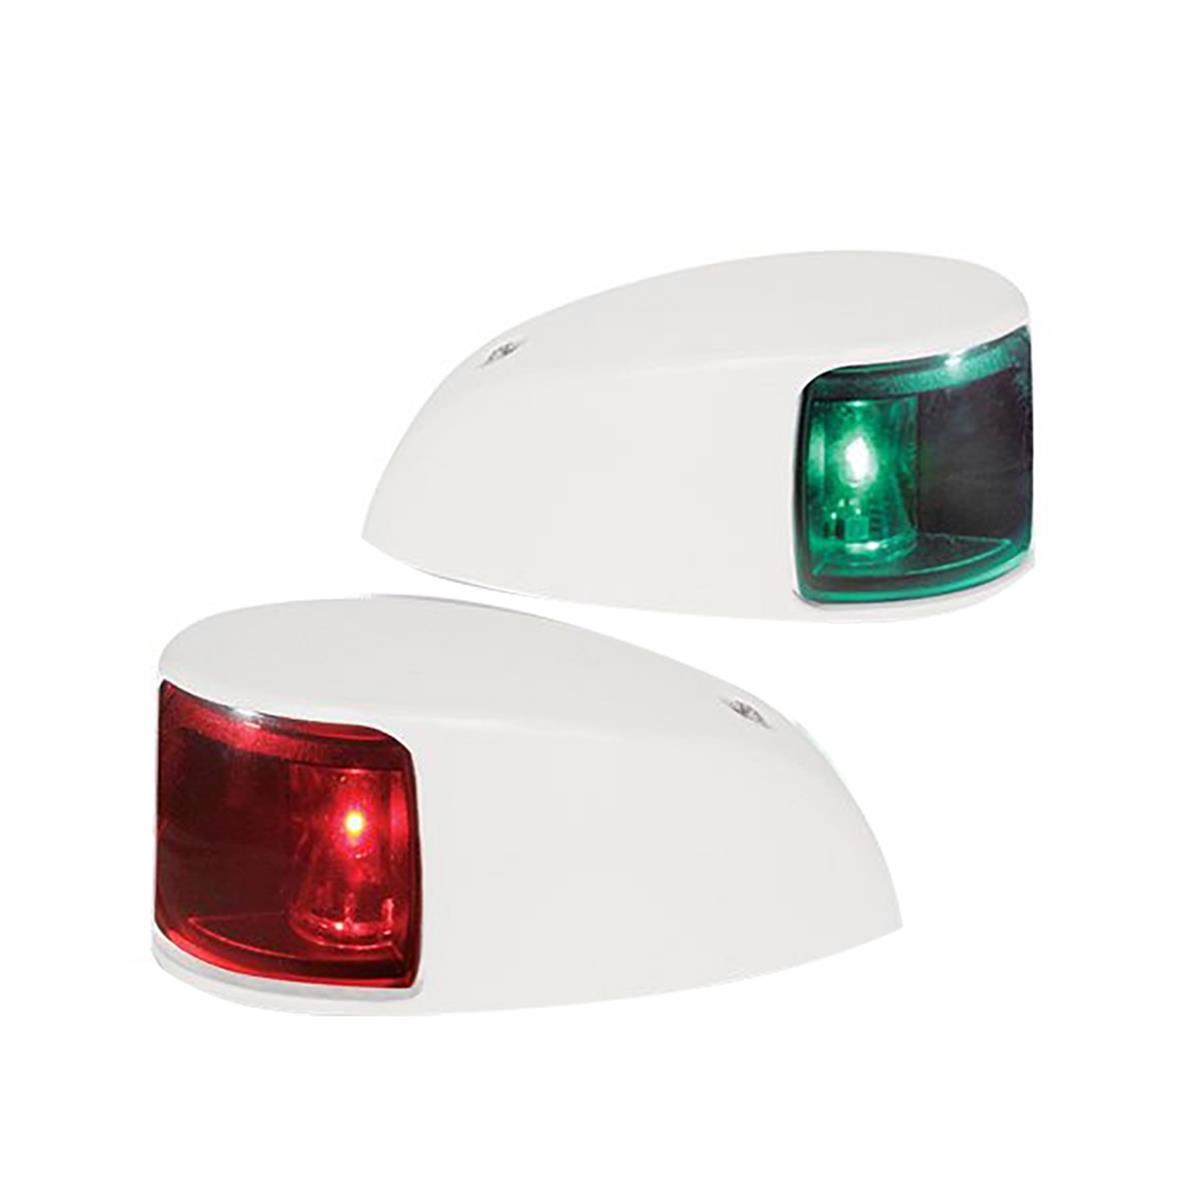 980620811 2 Nm Navi Led Deck Mount Port & Starboard Pair With Colored Lens, White